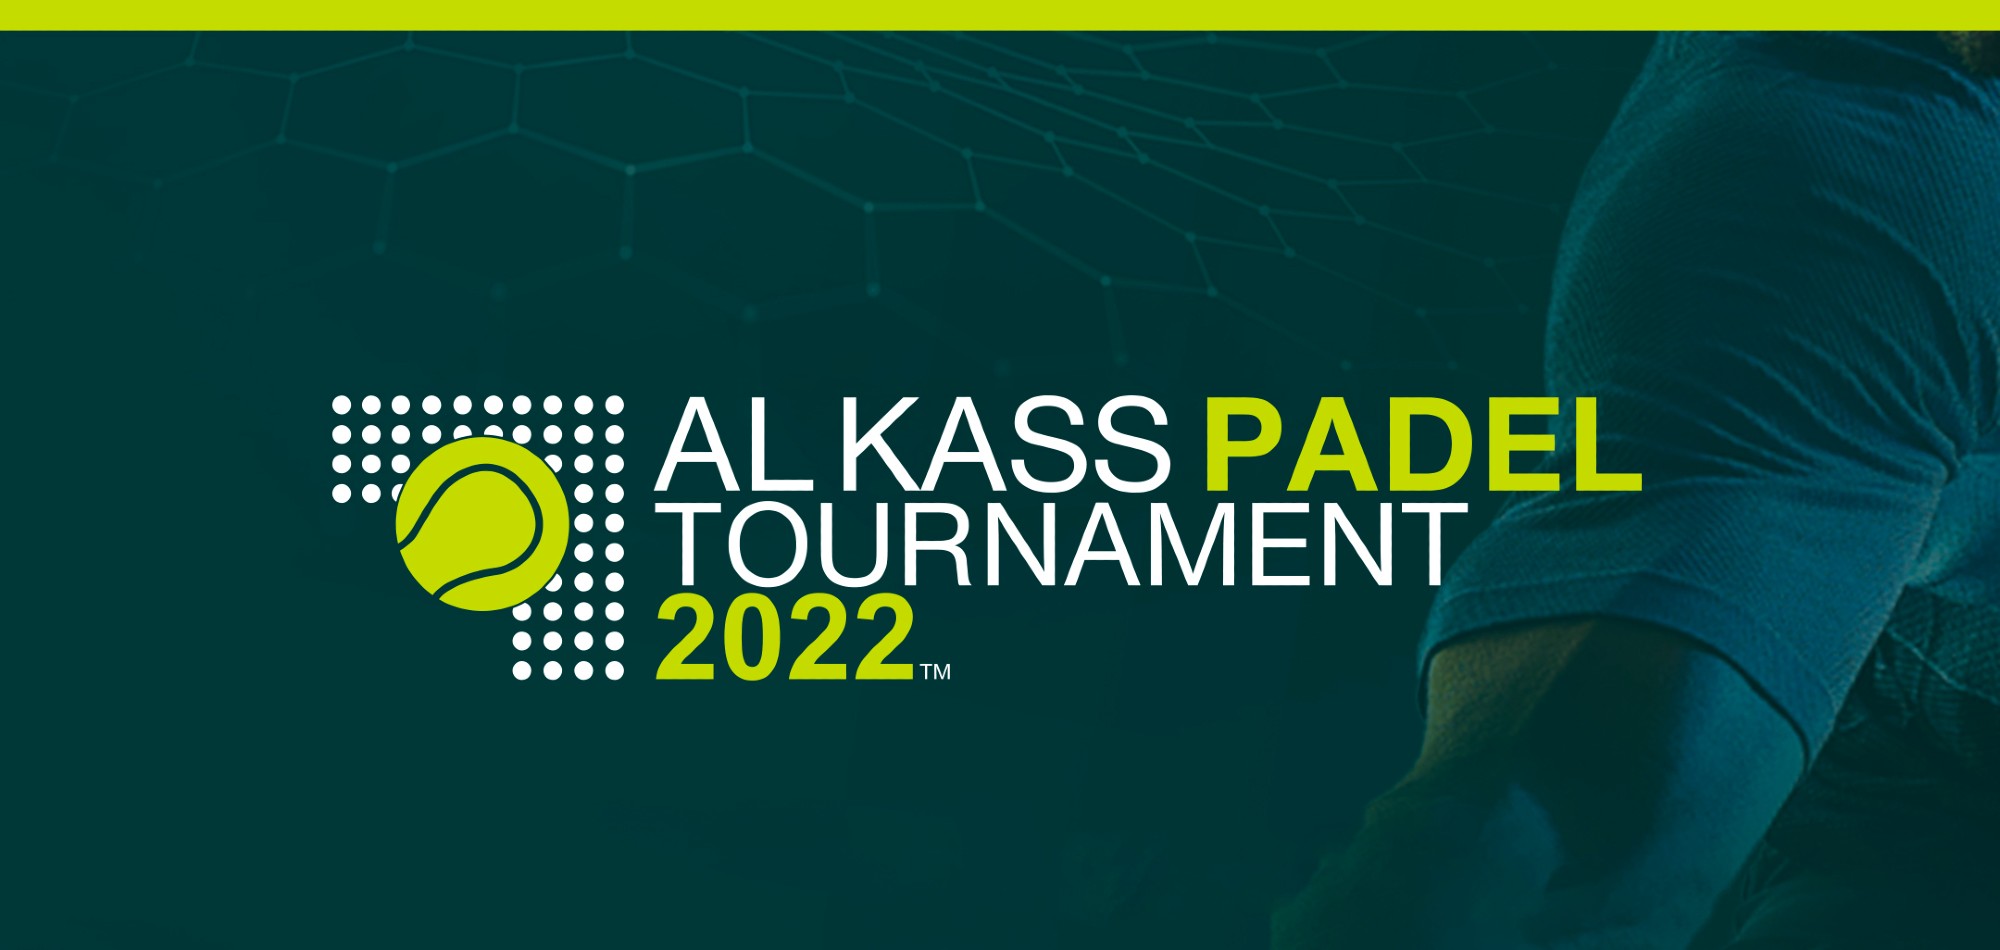 Registration now open for the first Al Kass Padel Tournament